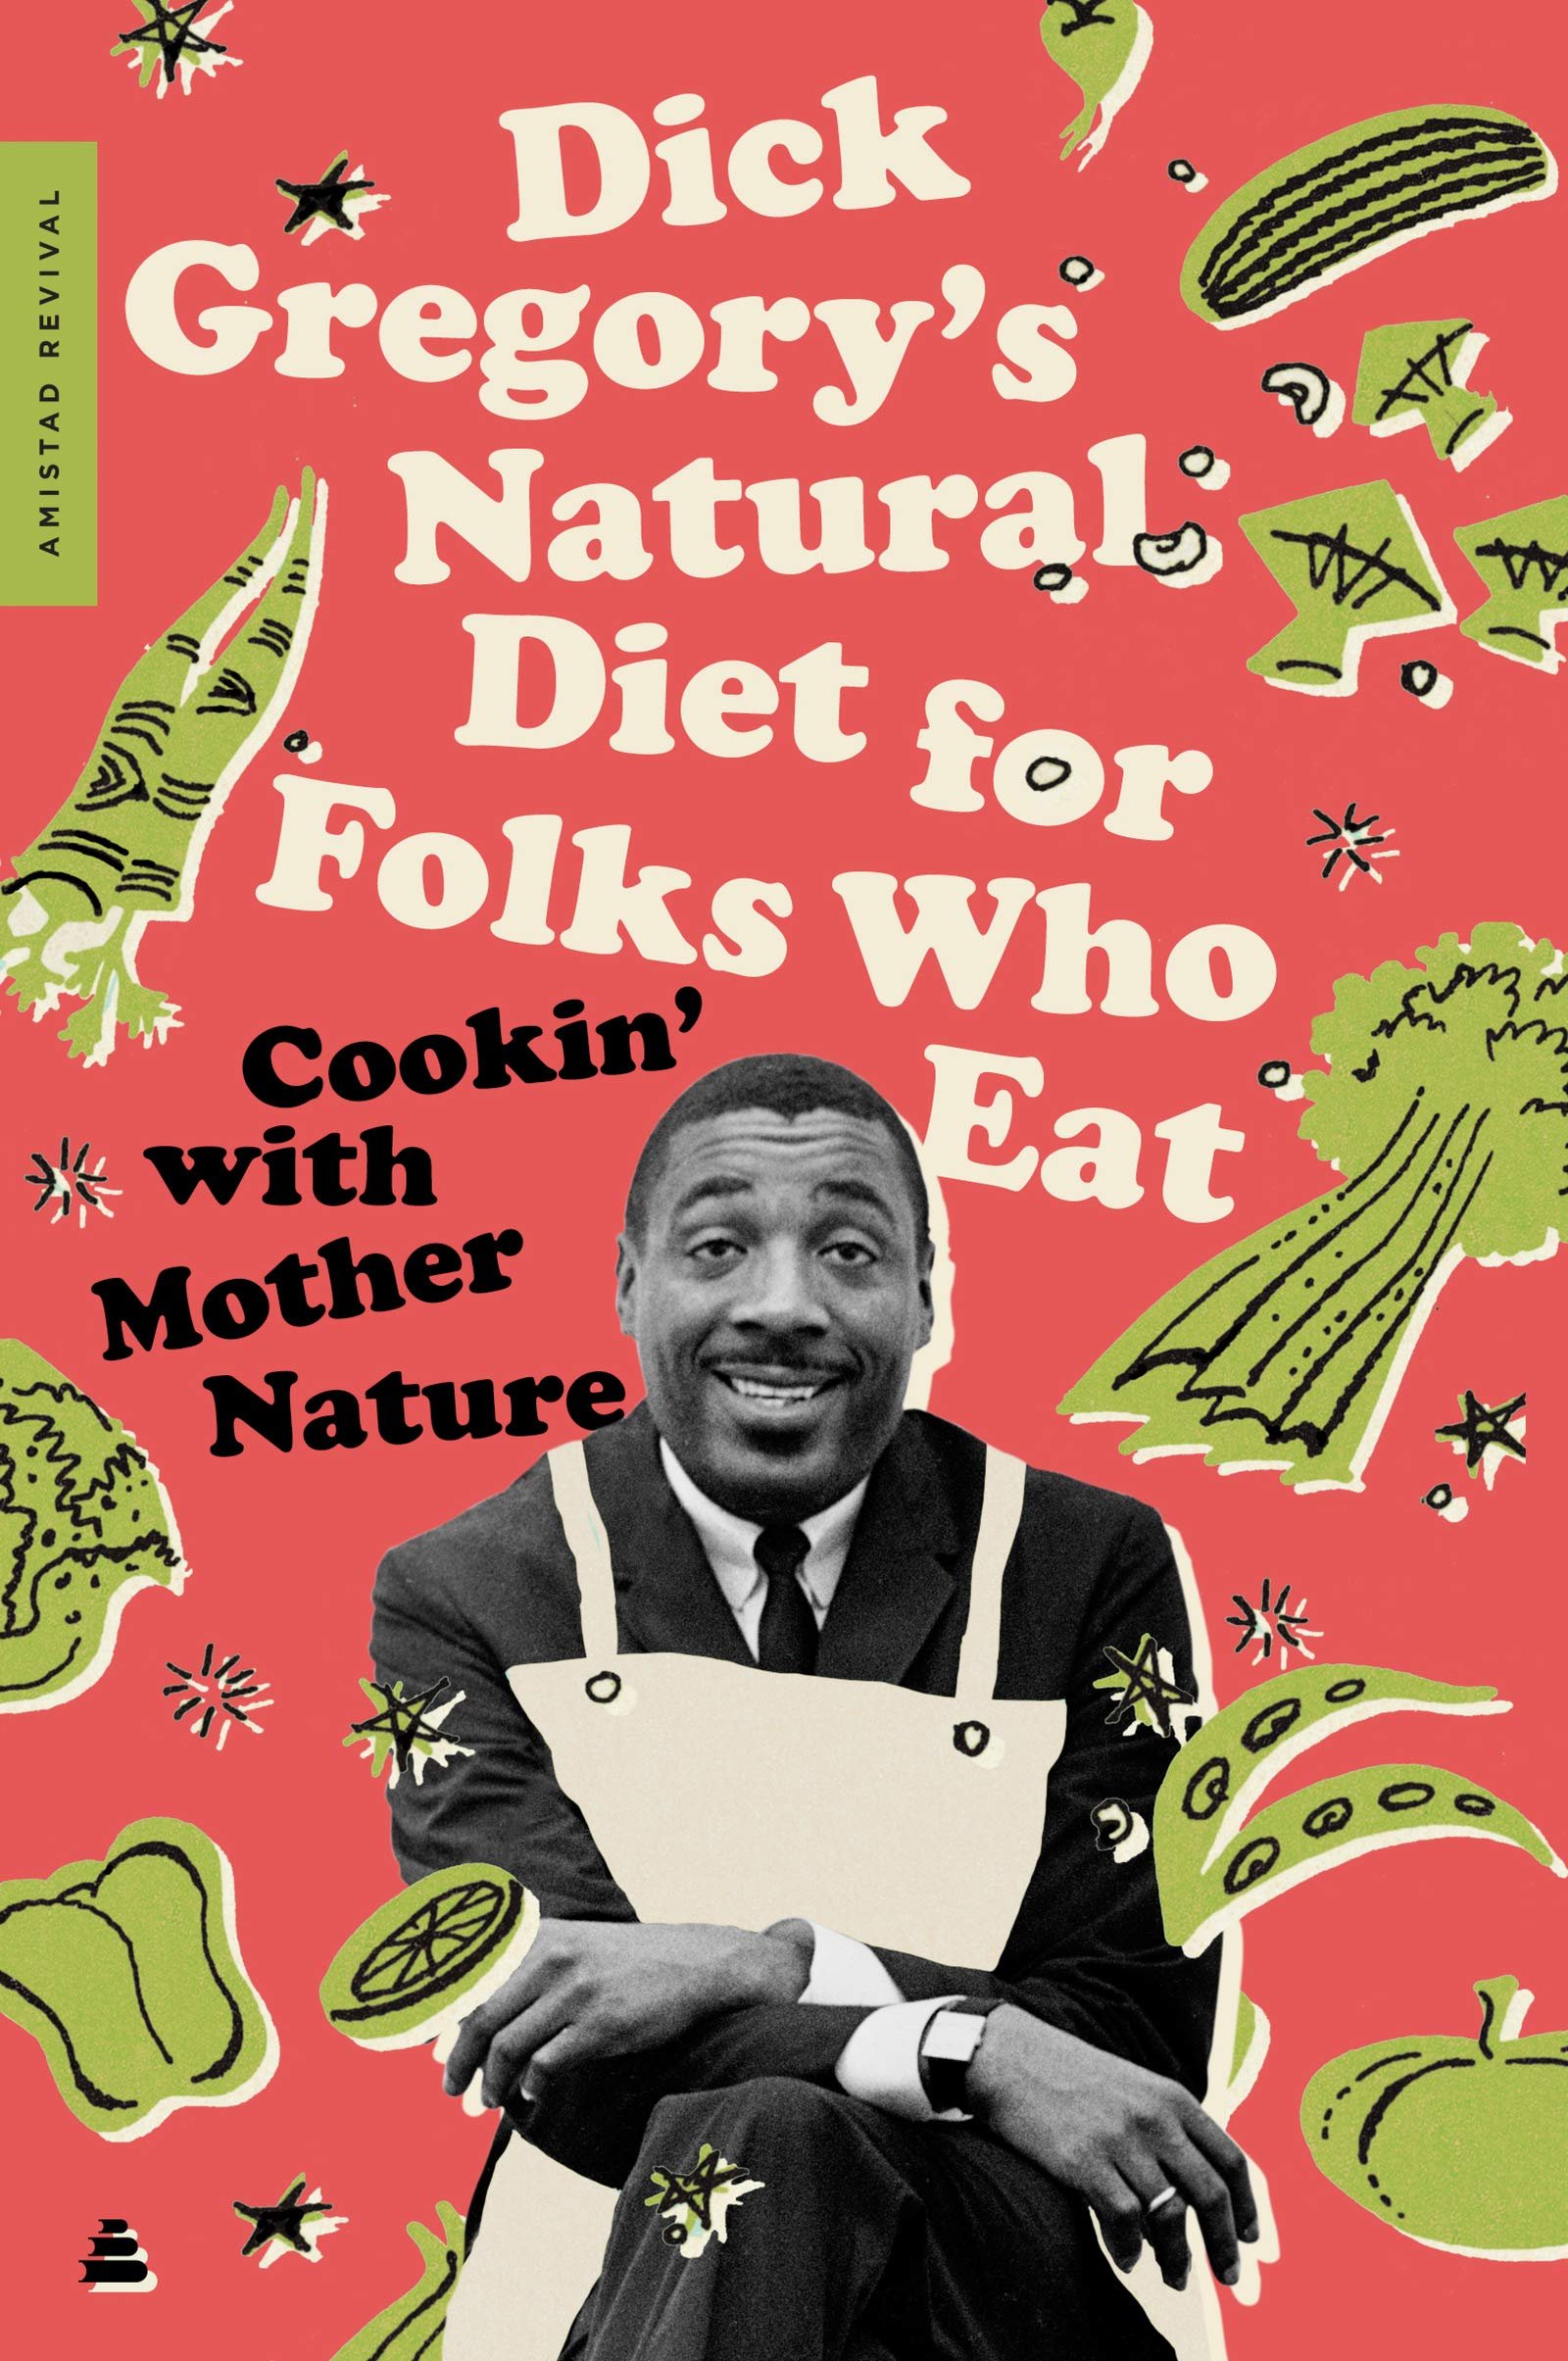 Dick Gregory’s Natural Diet for Folks Who Eat